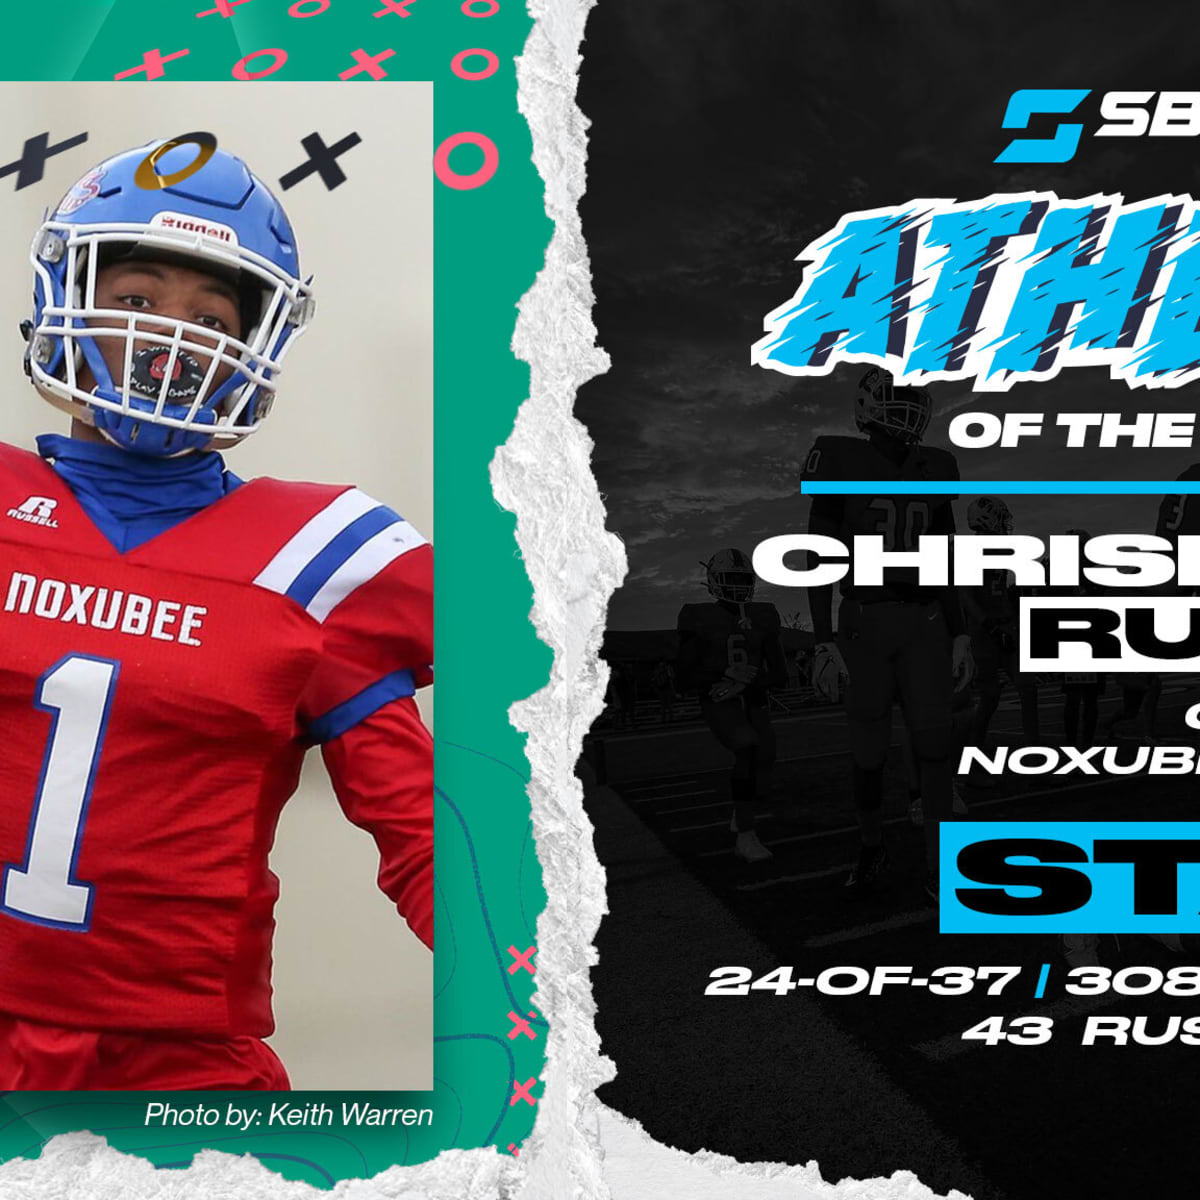 Noxubee County QB Chrishaad Rupert voted SBLives Mississippi High School Athlete of the Week